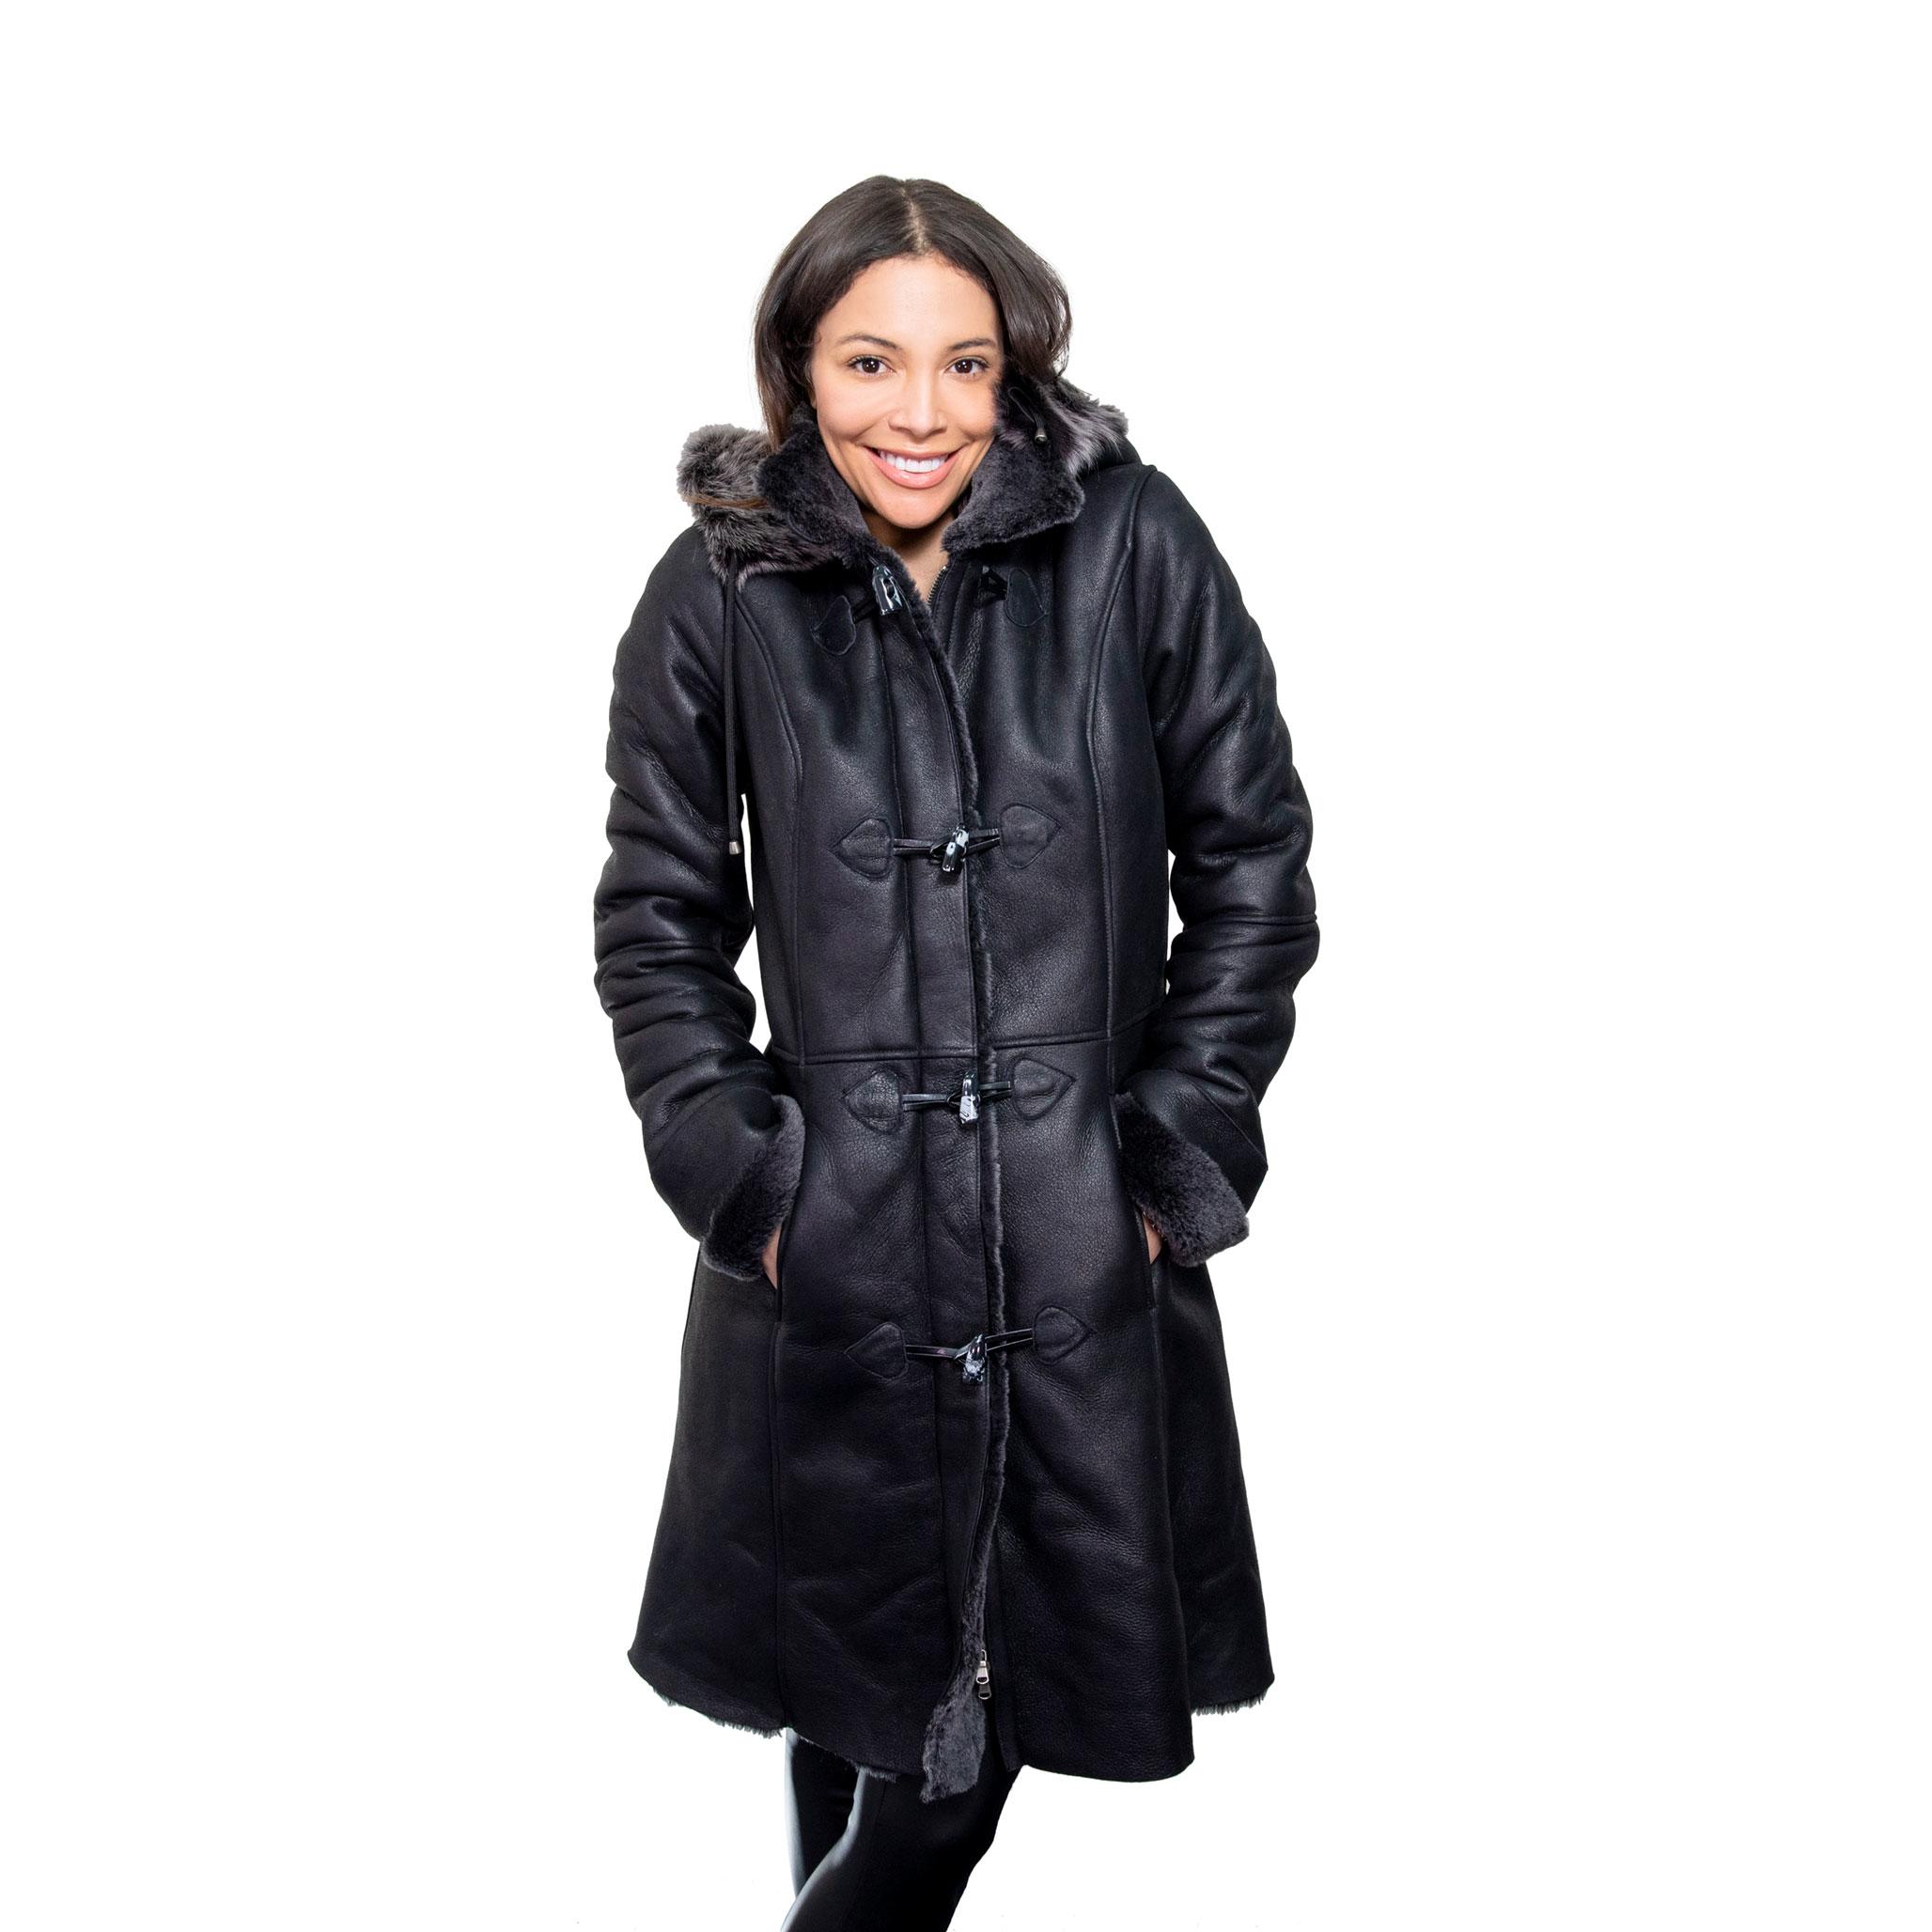 The model smiles, with her hand tucked in to her long, black hooded Sheepskin Coat. The luxury coat features decadent toscana fur in the hood, and cuff. Long toggled fastening, supplementing the front zipped closure.